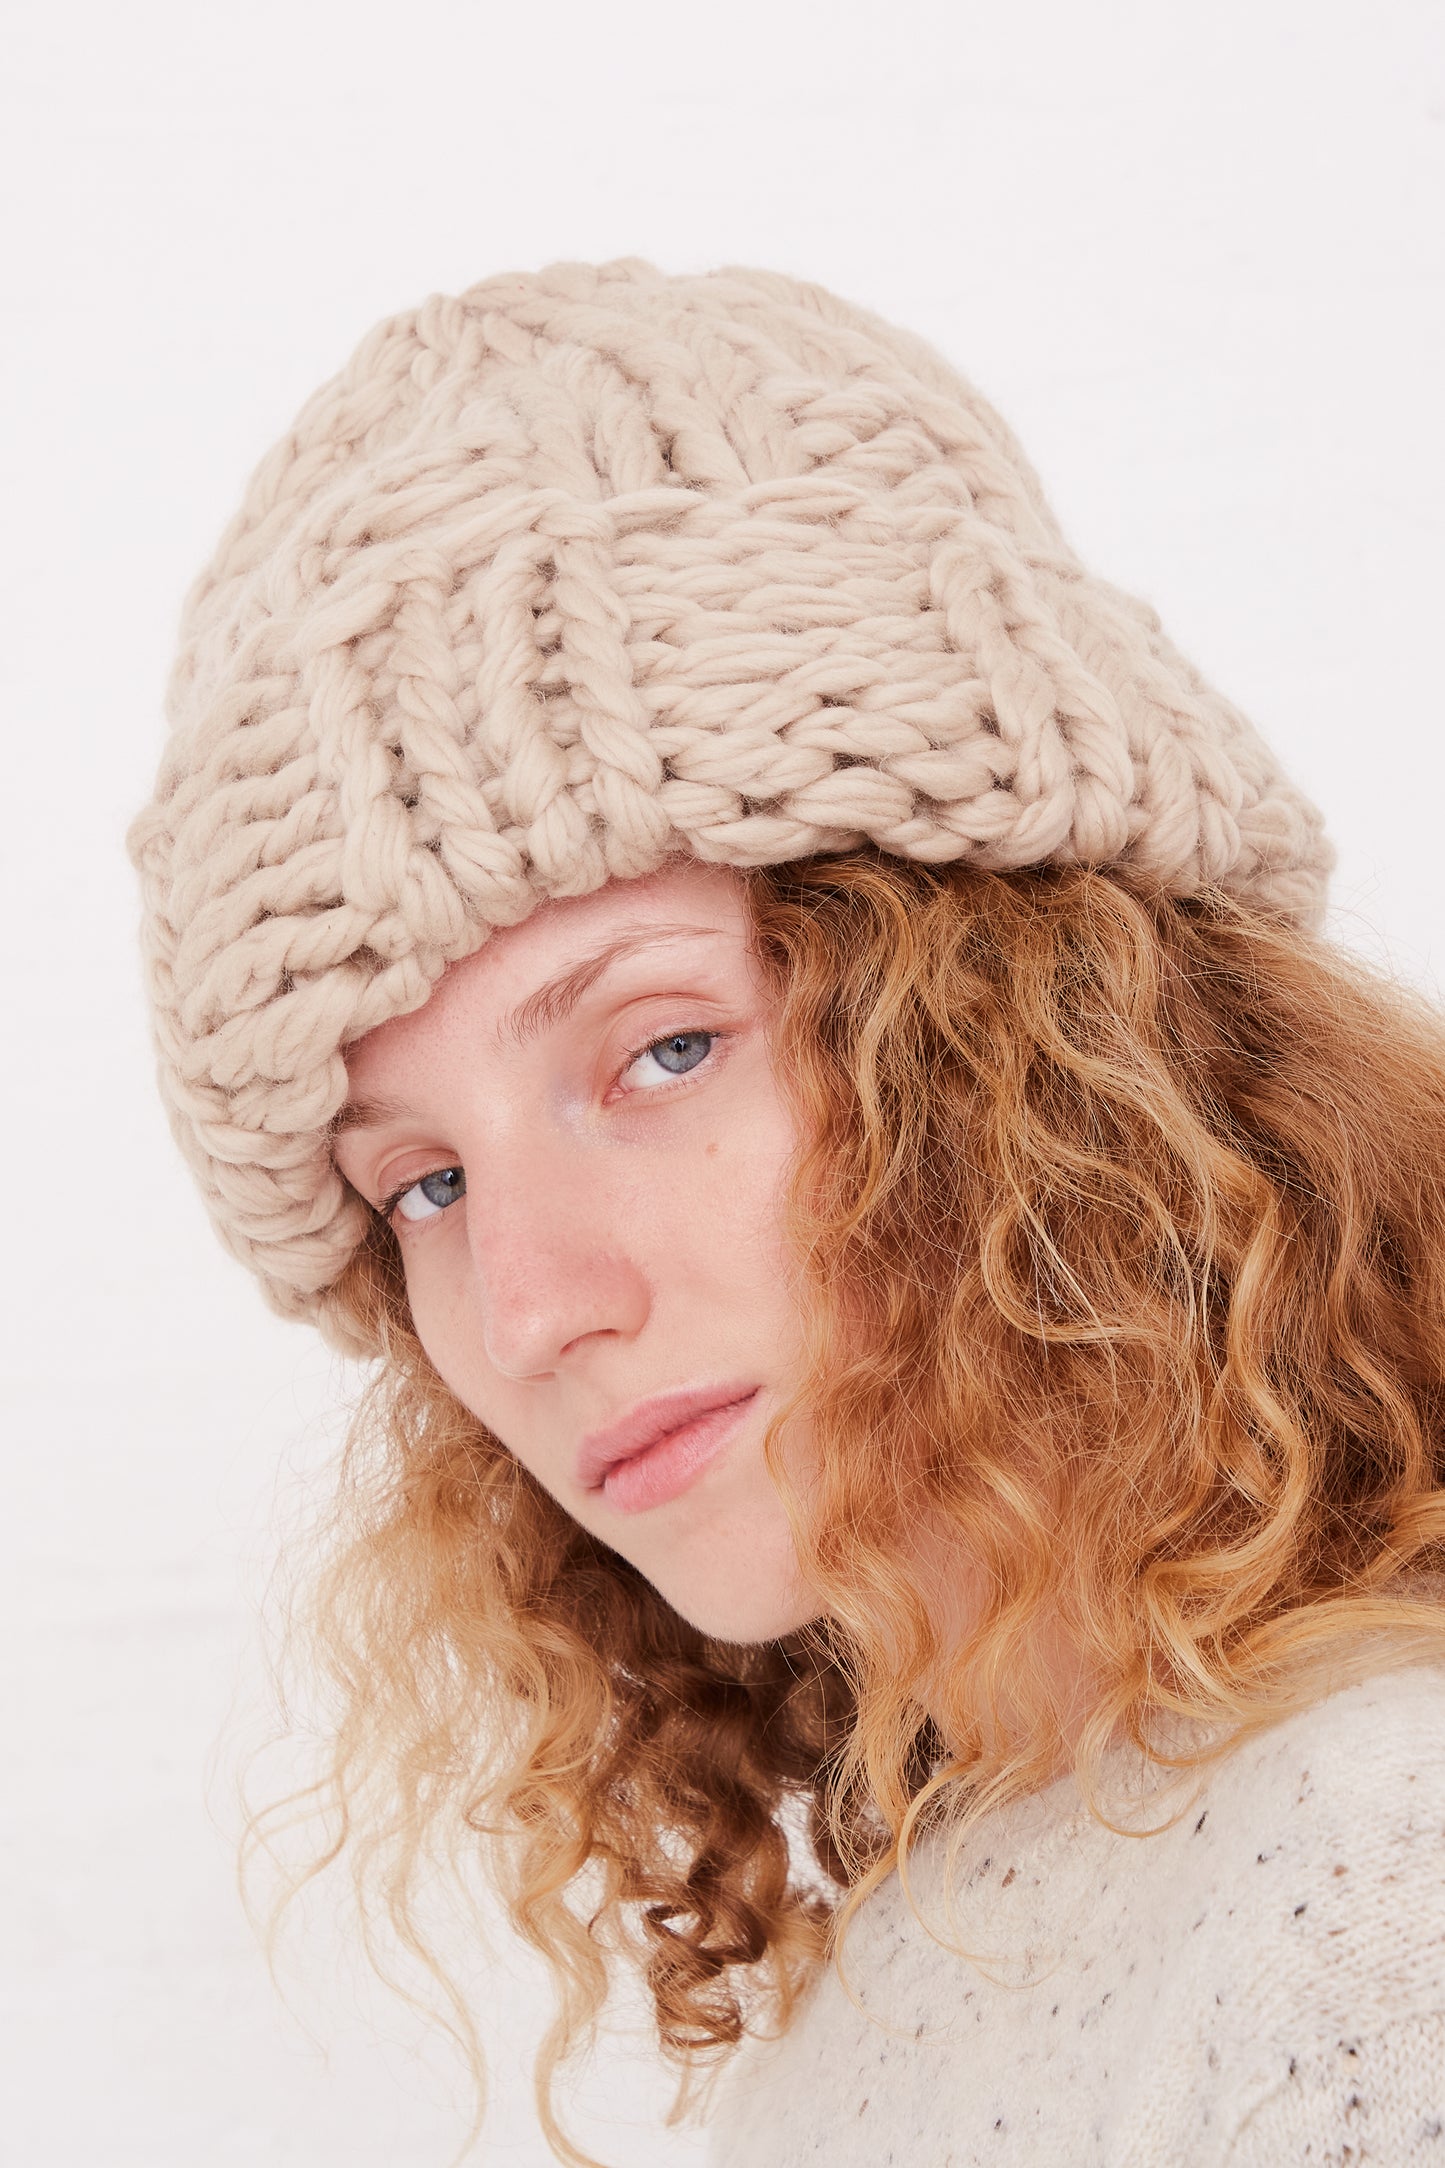 A woman up close wearing an oversized Lauren Manoogian Handknit Chunky Rib Hat in Antique.